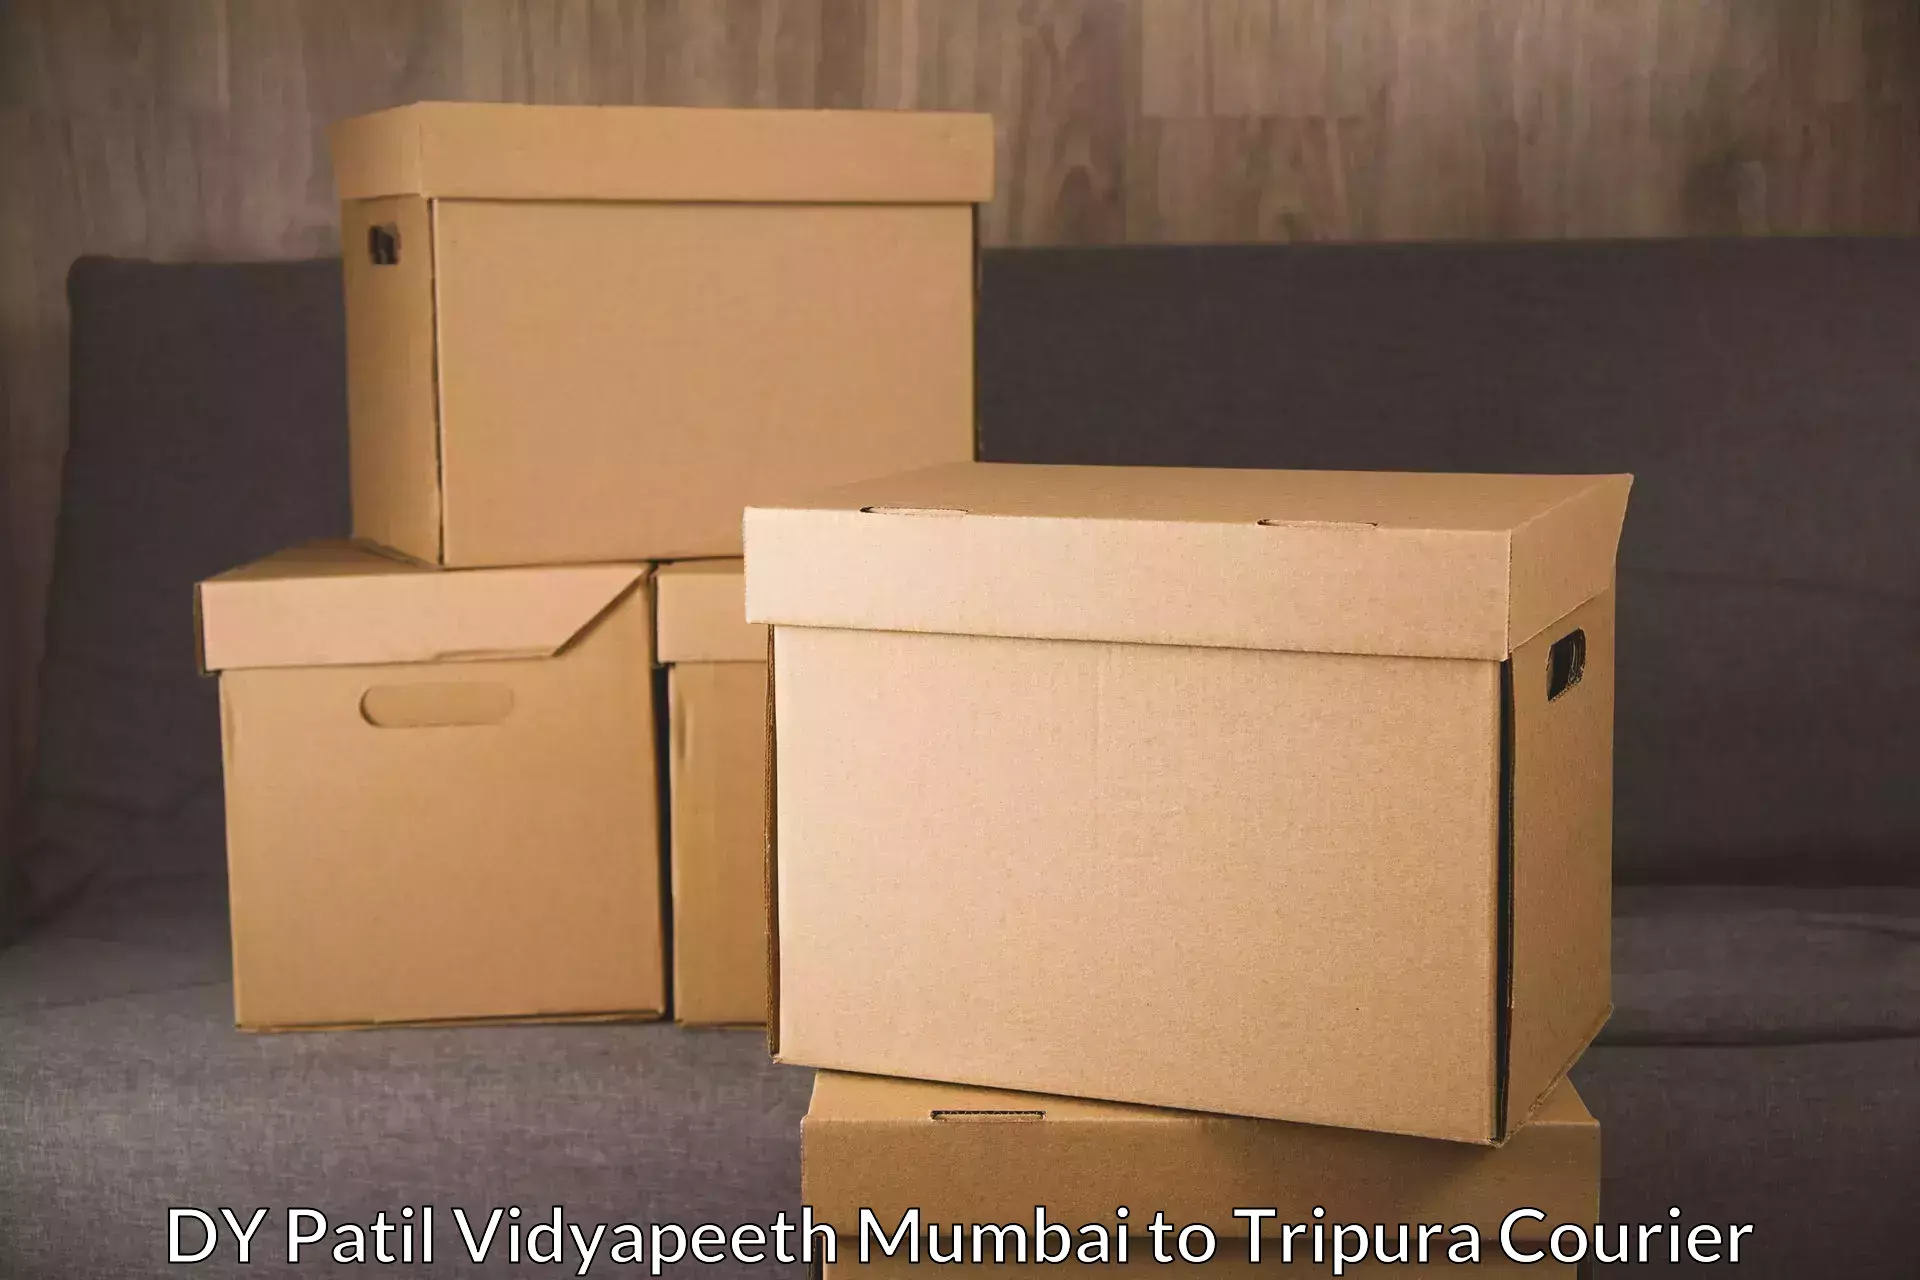 Parcel handling and care in DY Patil Vidyapeeth Mumbai to South Tripura